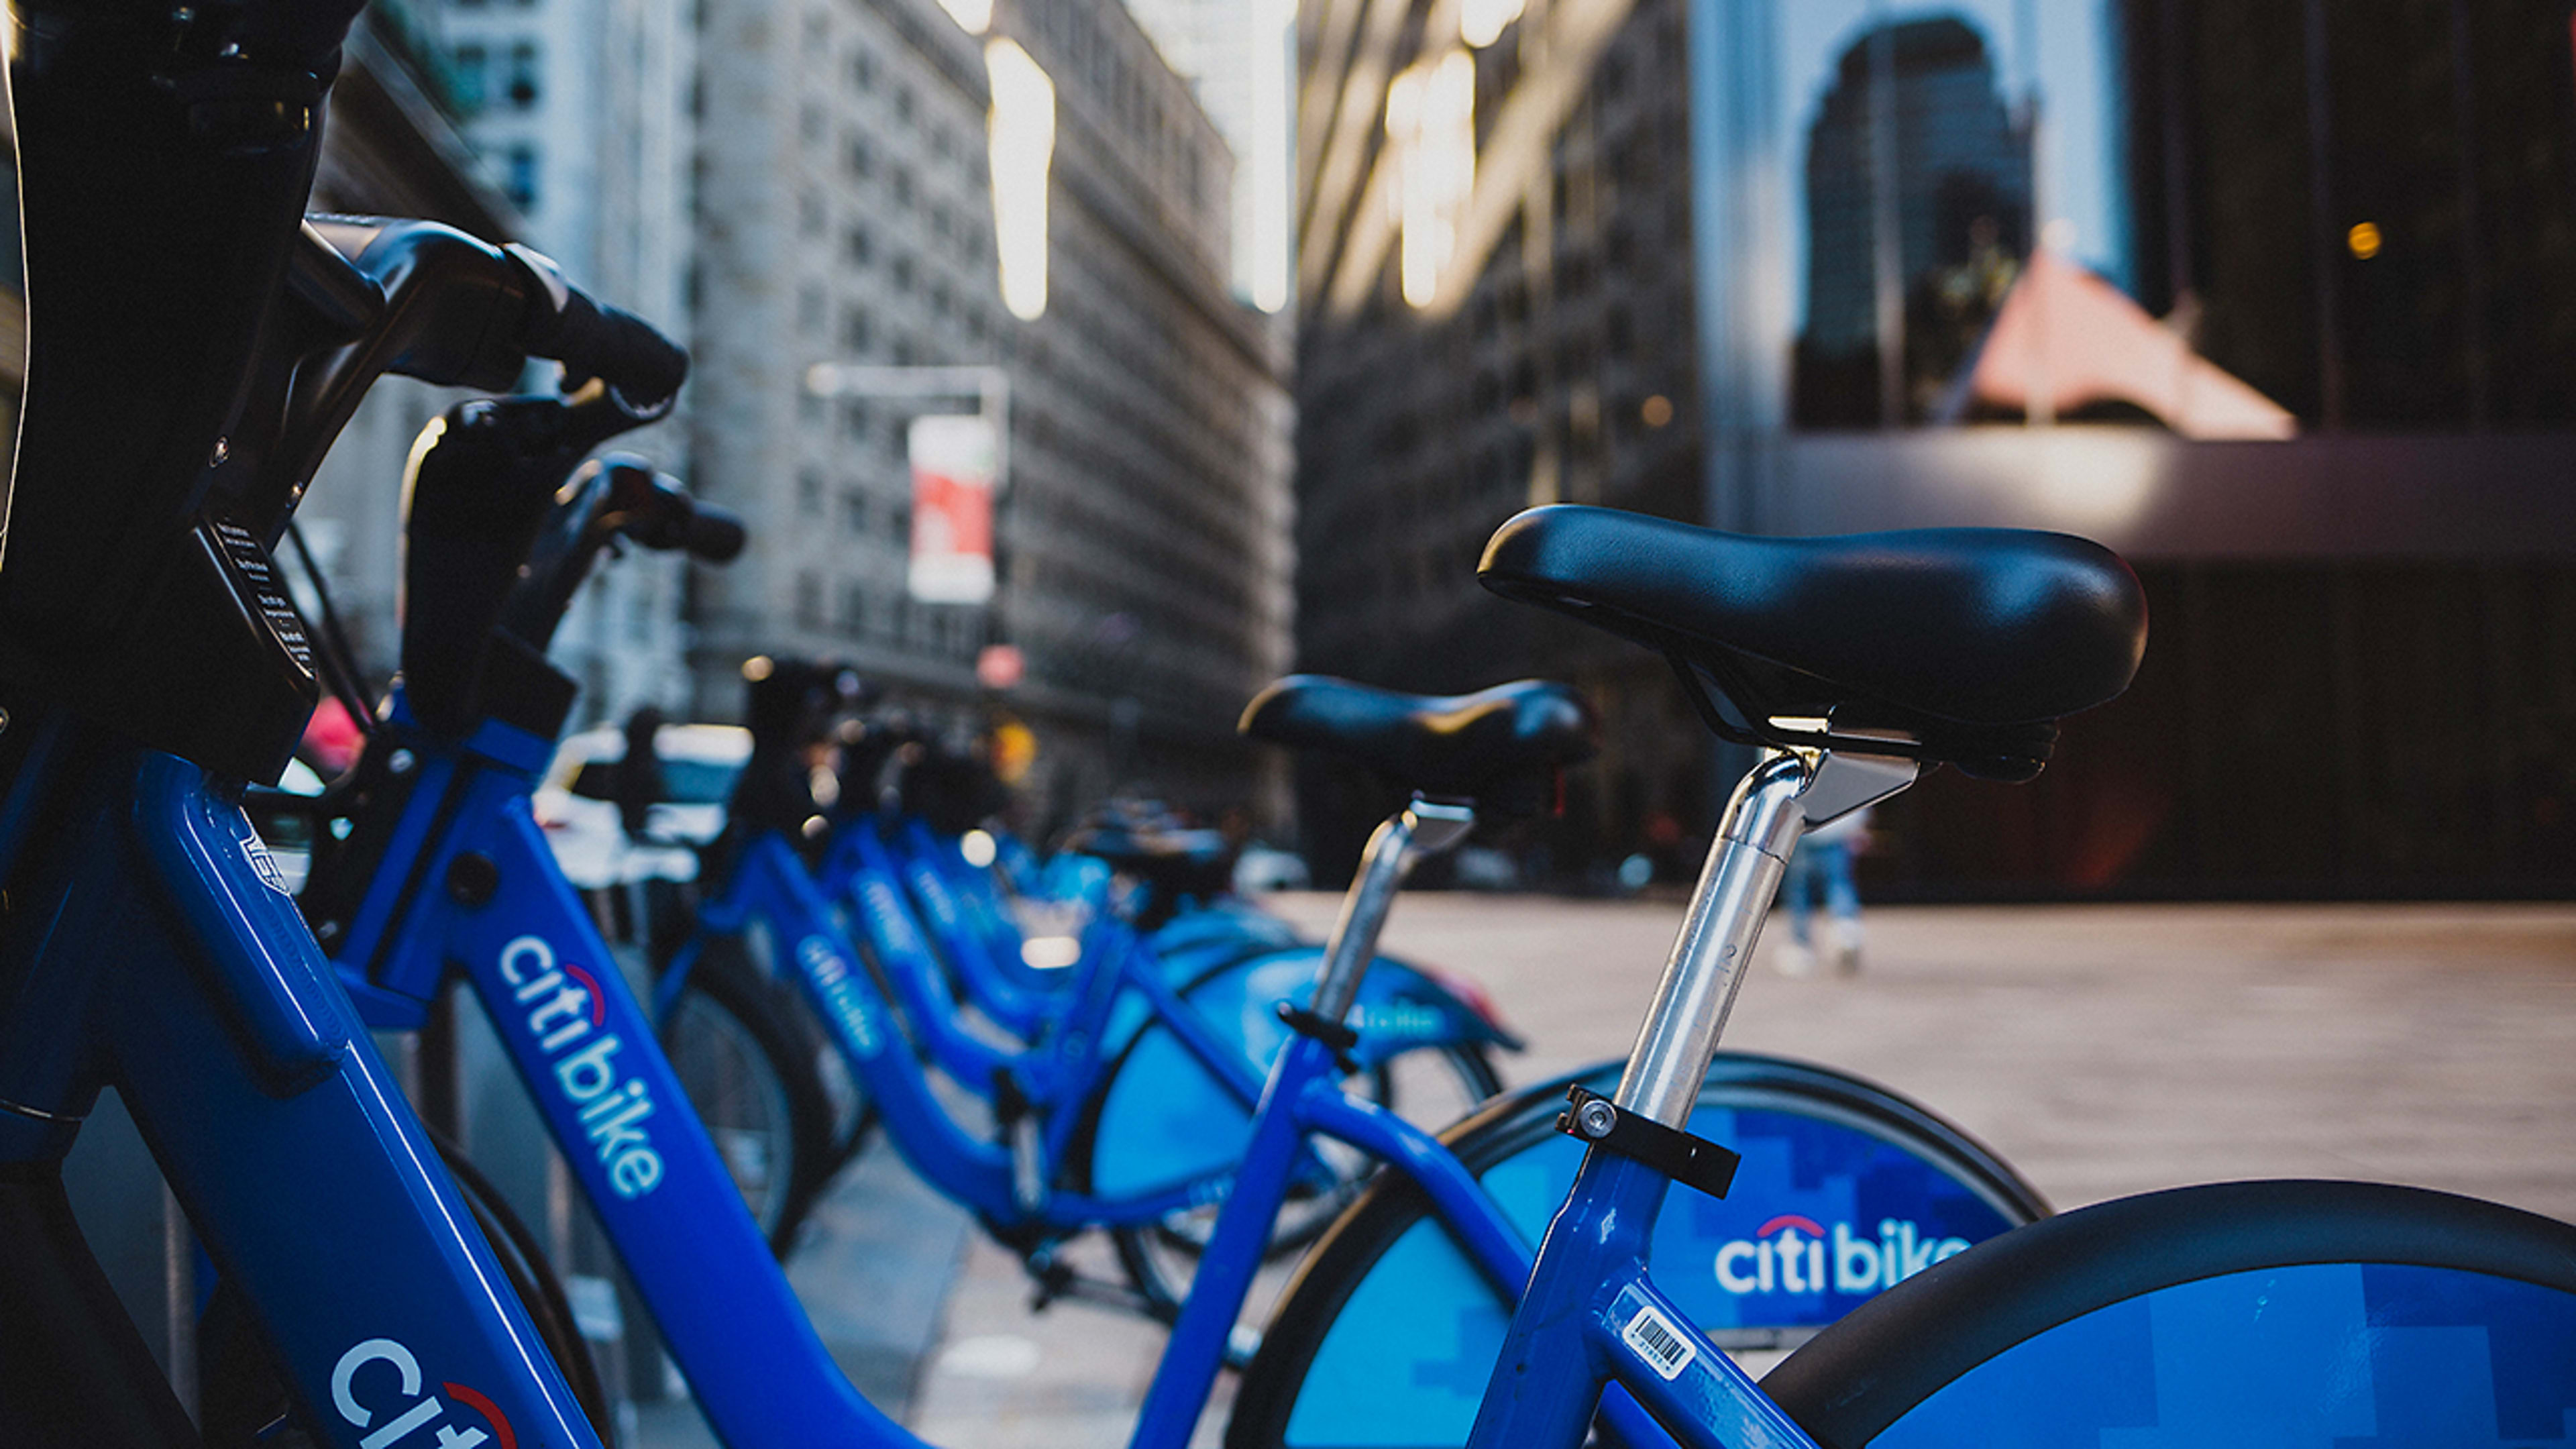 What It Will Take To (Finally) Make A Bike-Share System That’ll Benefit Everyone